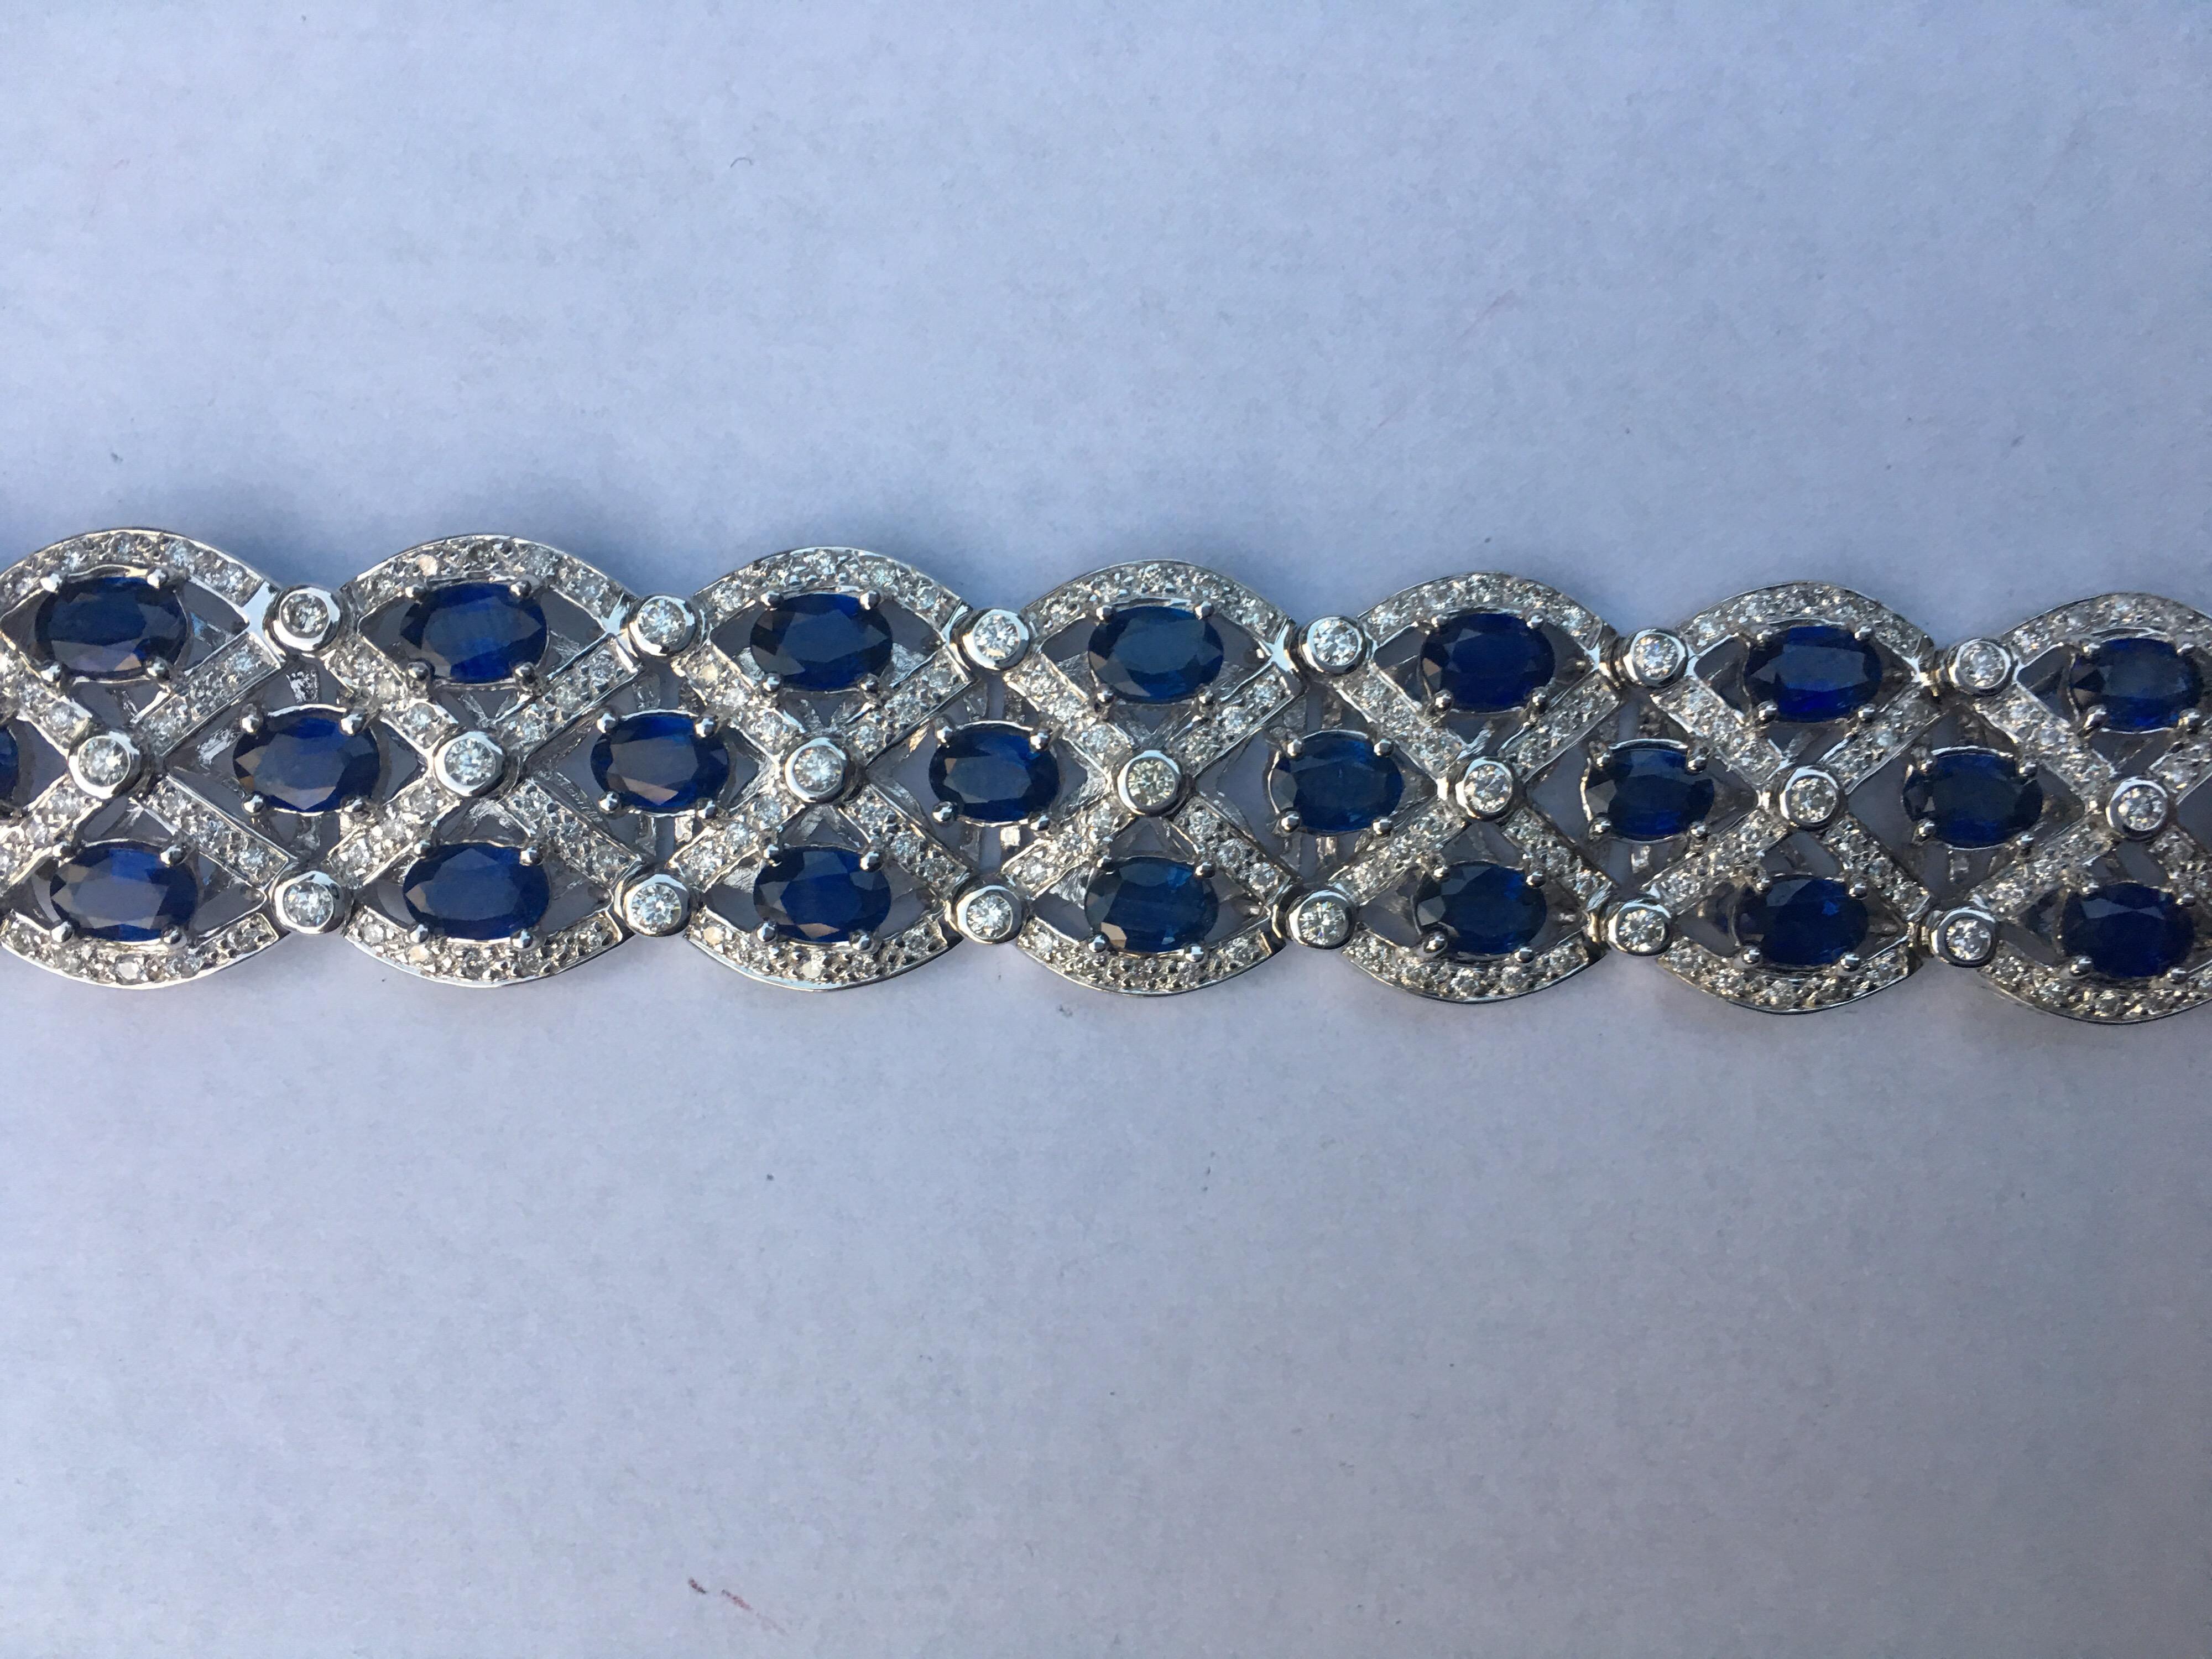 Natural Blue Sapphire and White Diamonds Bracelet set in 18K White Gold.
The Blue Sapphire weight is 22.10 Carat and White Diamond is 4.26 Carat.
The Bracelet is one of a kind hand crafted.